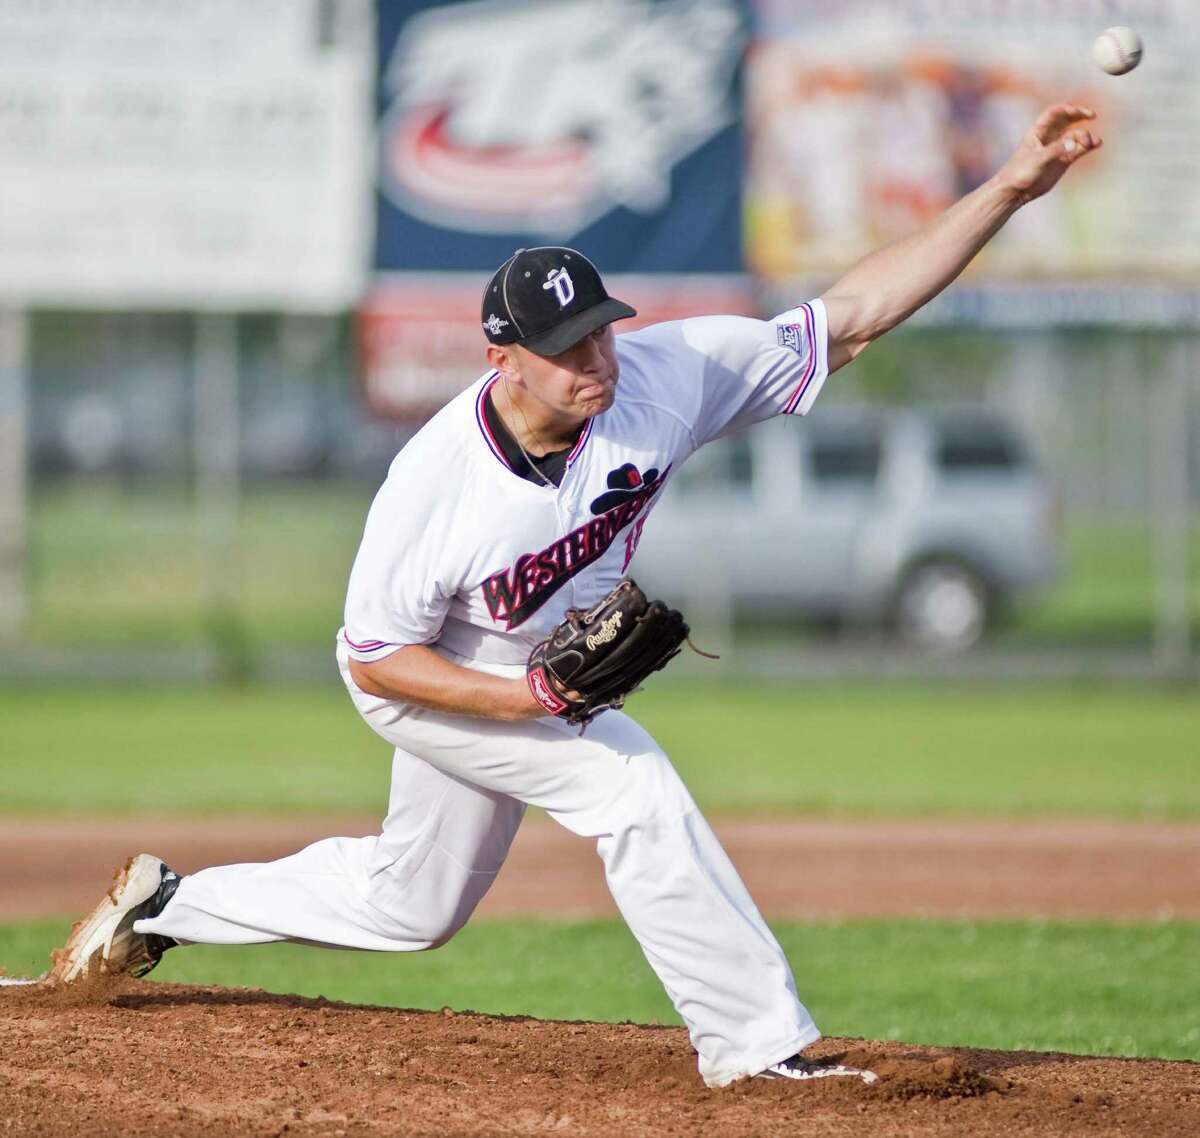 Danbury Westerners pitcher Max Knutson fires the ball in a game against the Newport Gulls, played at Rogers Park in Danbury. June 28, 2014